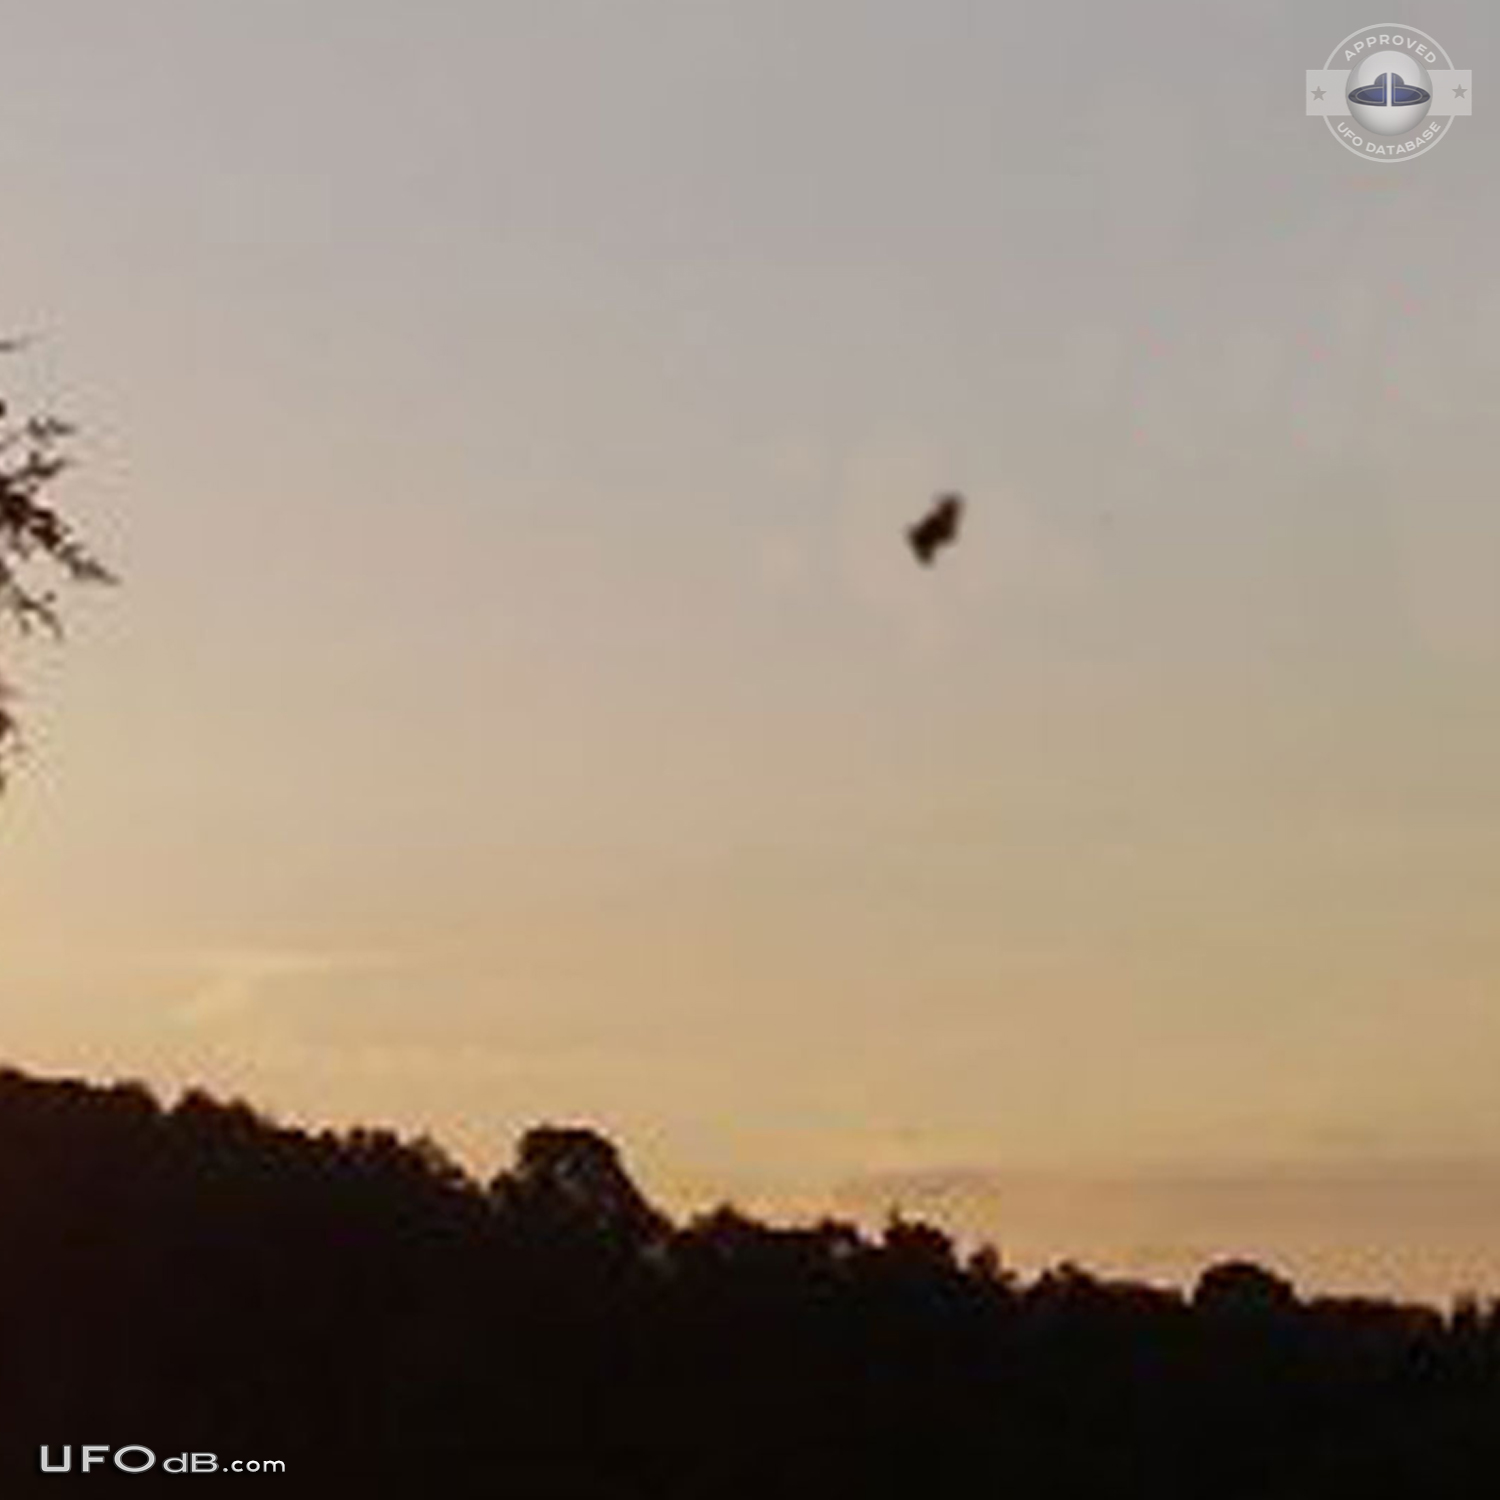 Bright metallic UFO caught on picture over Nasice, Croatia in May 2008 UFO Picture #471-2